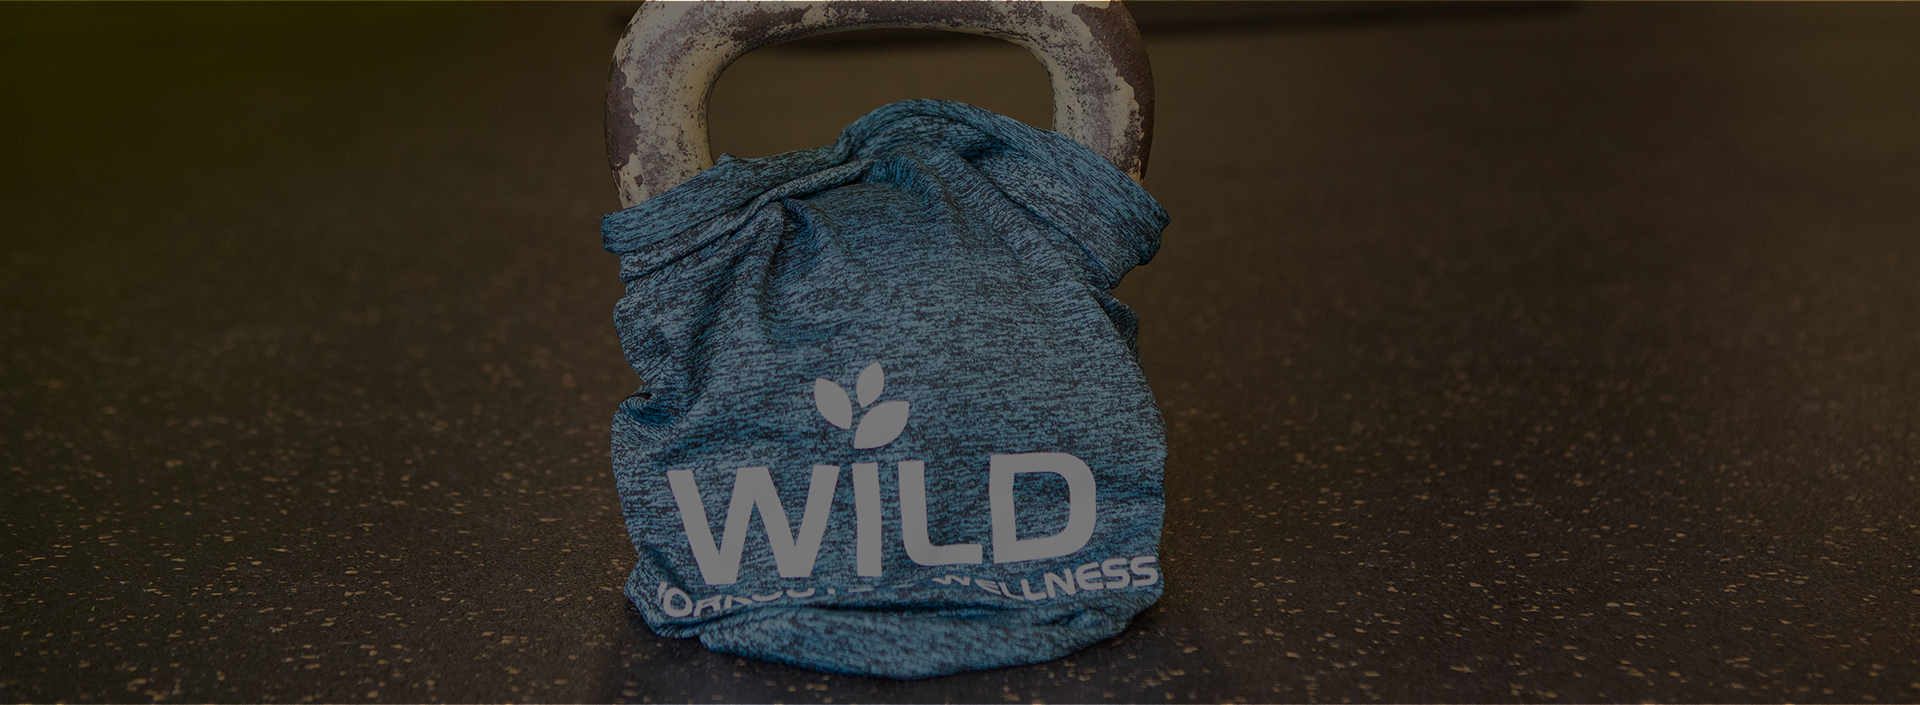 kettlebell with wild workout cover on it